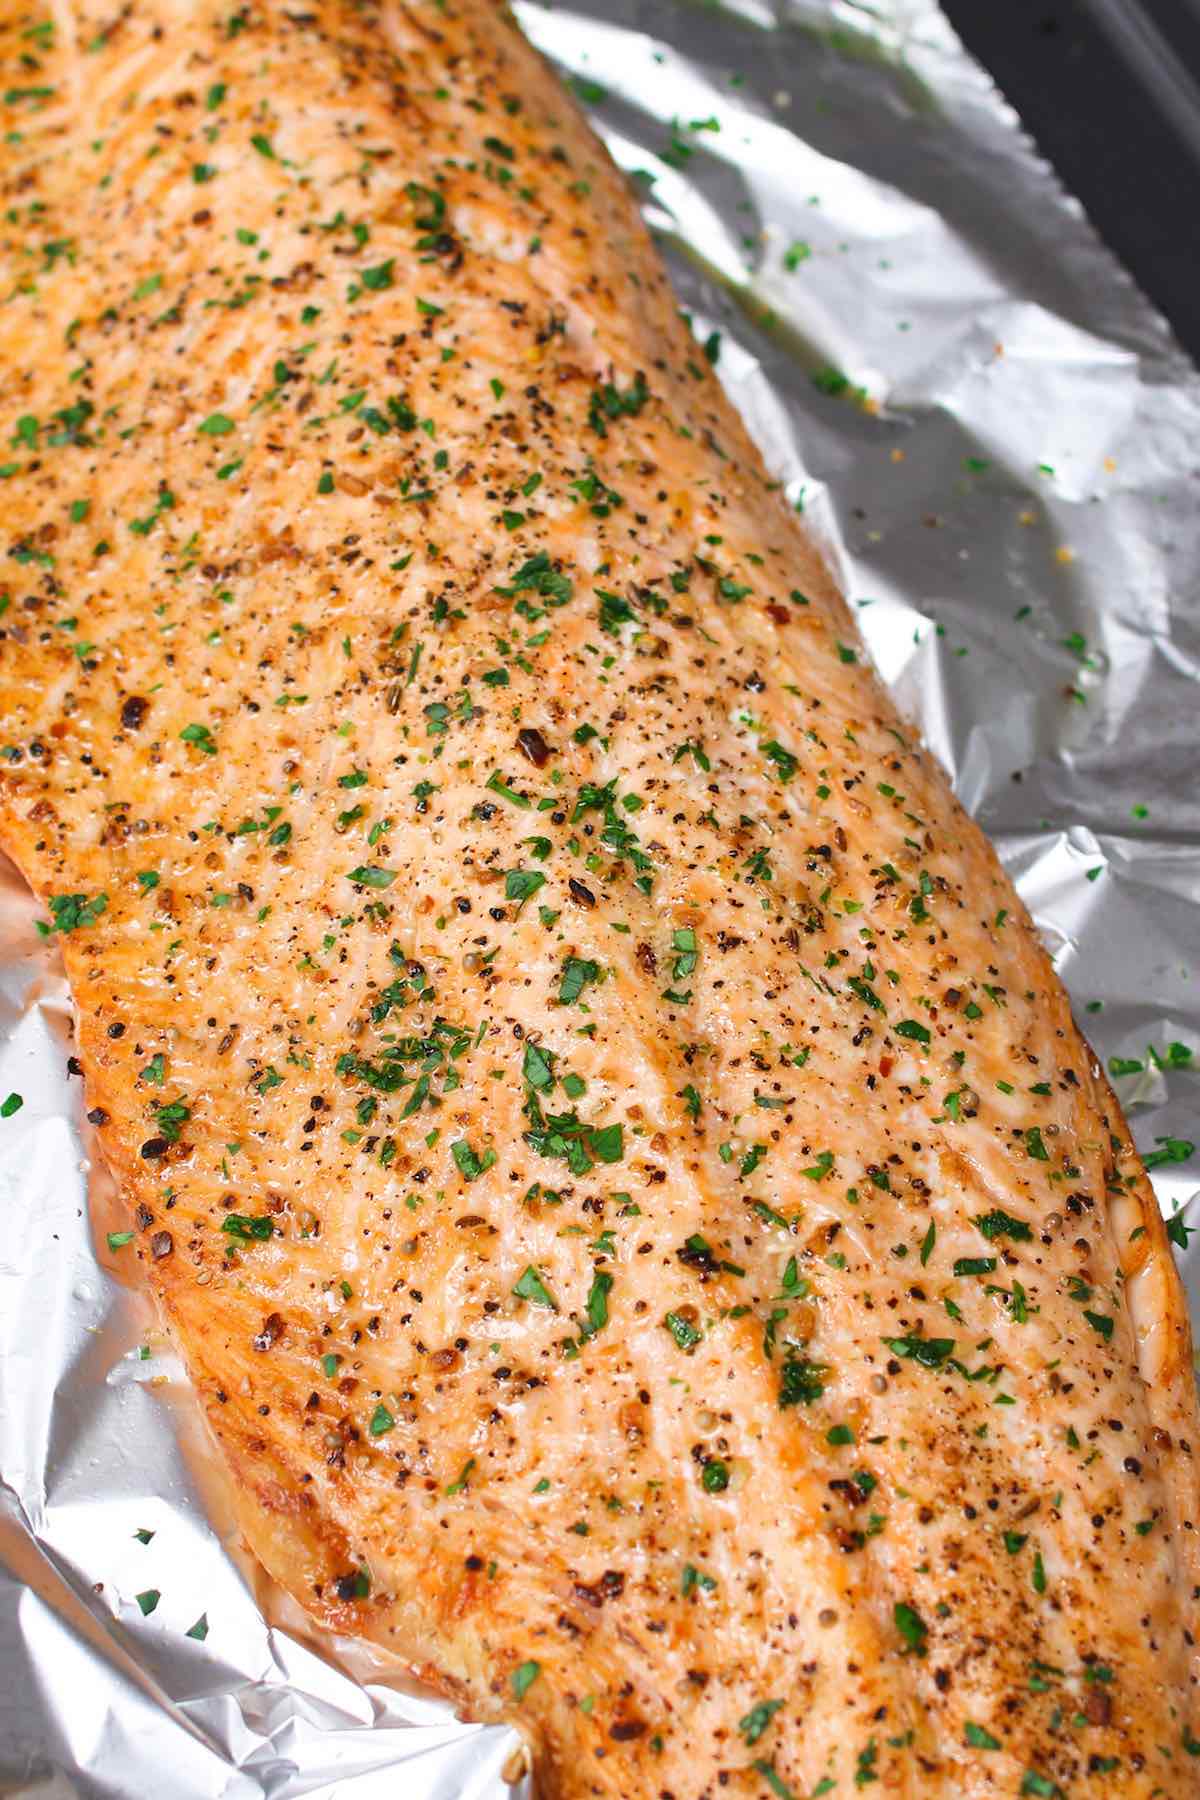 Baked Salmon fresh out of the oven with a crisp exterior and fresh herbs on top